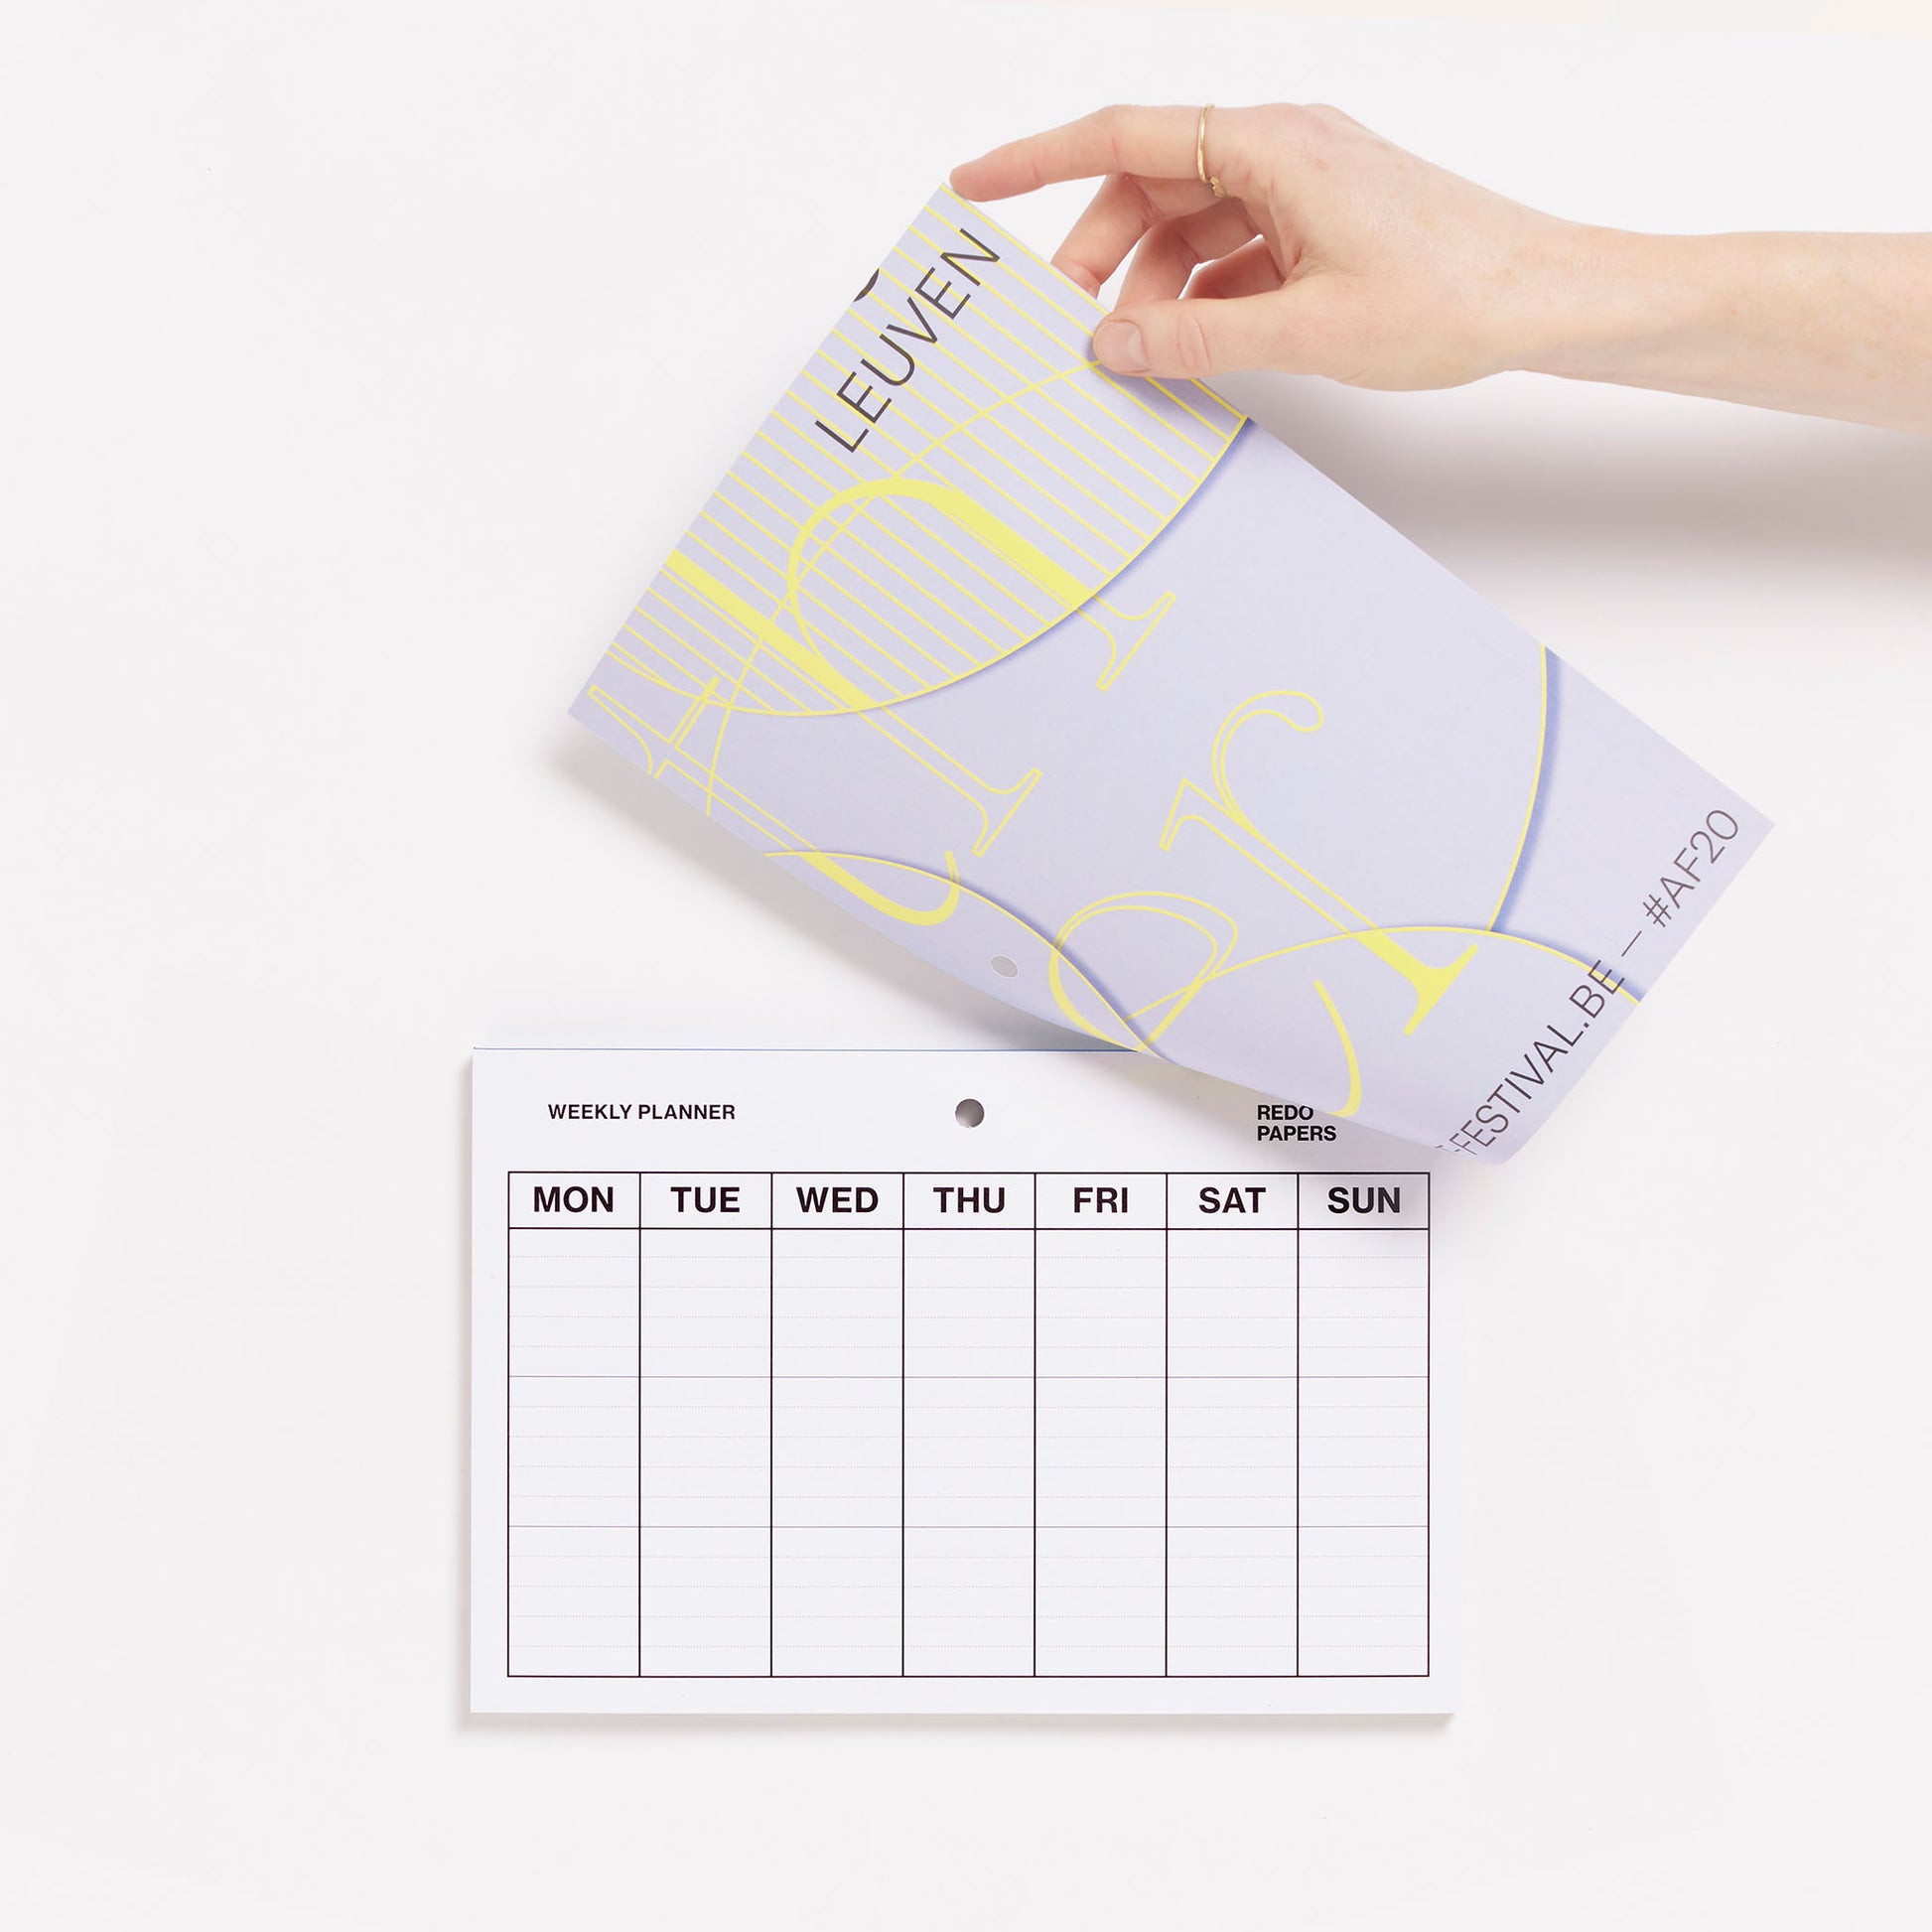 The weekly planner gives you a new opportunity each week and an original print.